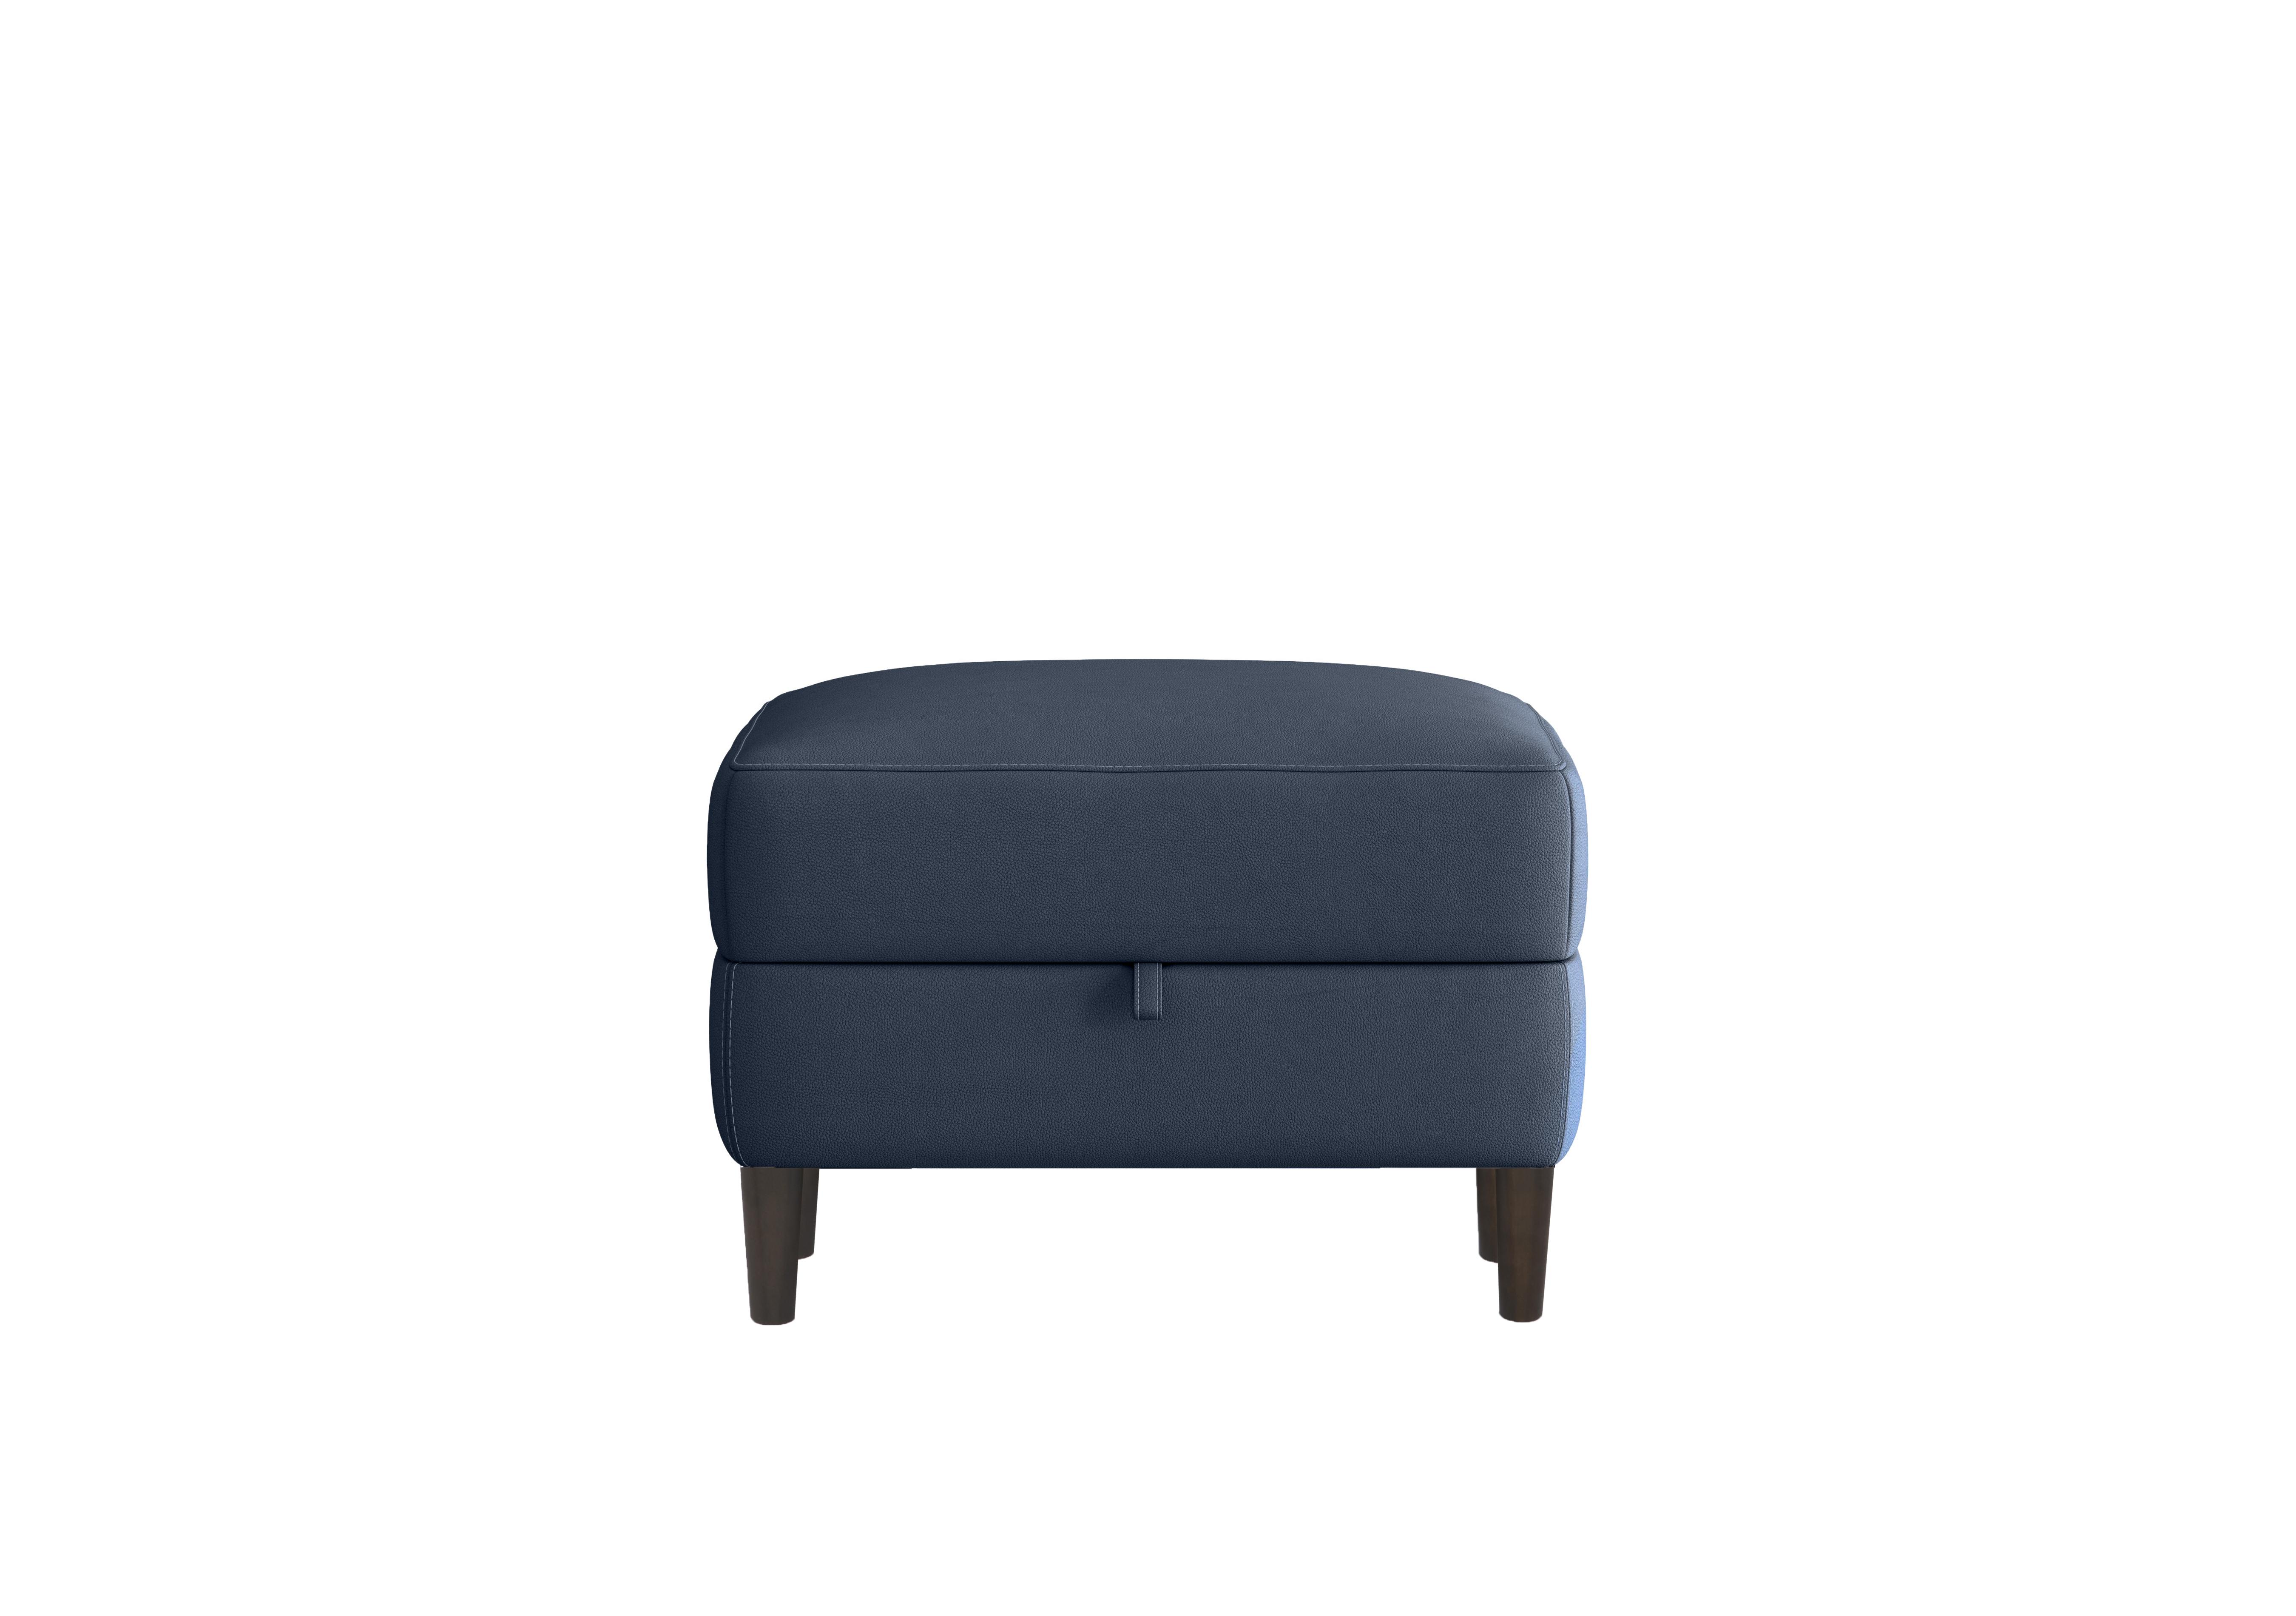 Uno Leather Storage Footstool in Bv-313e Ocean Blue on Furniture Village